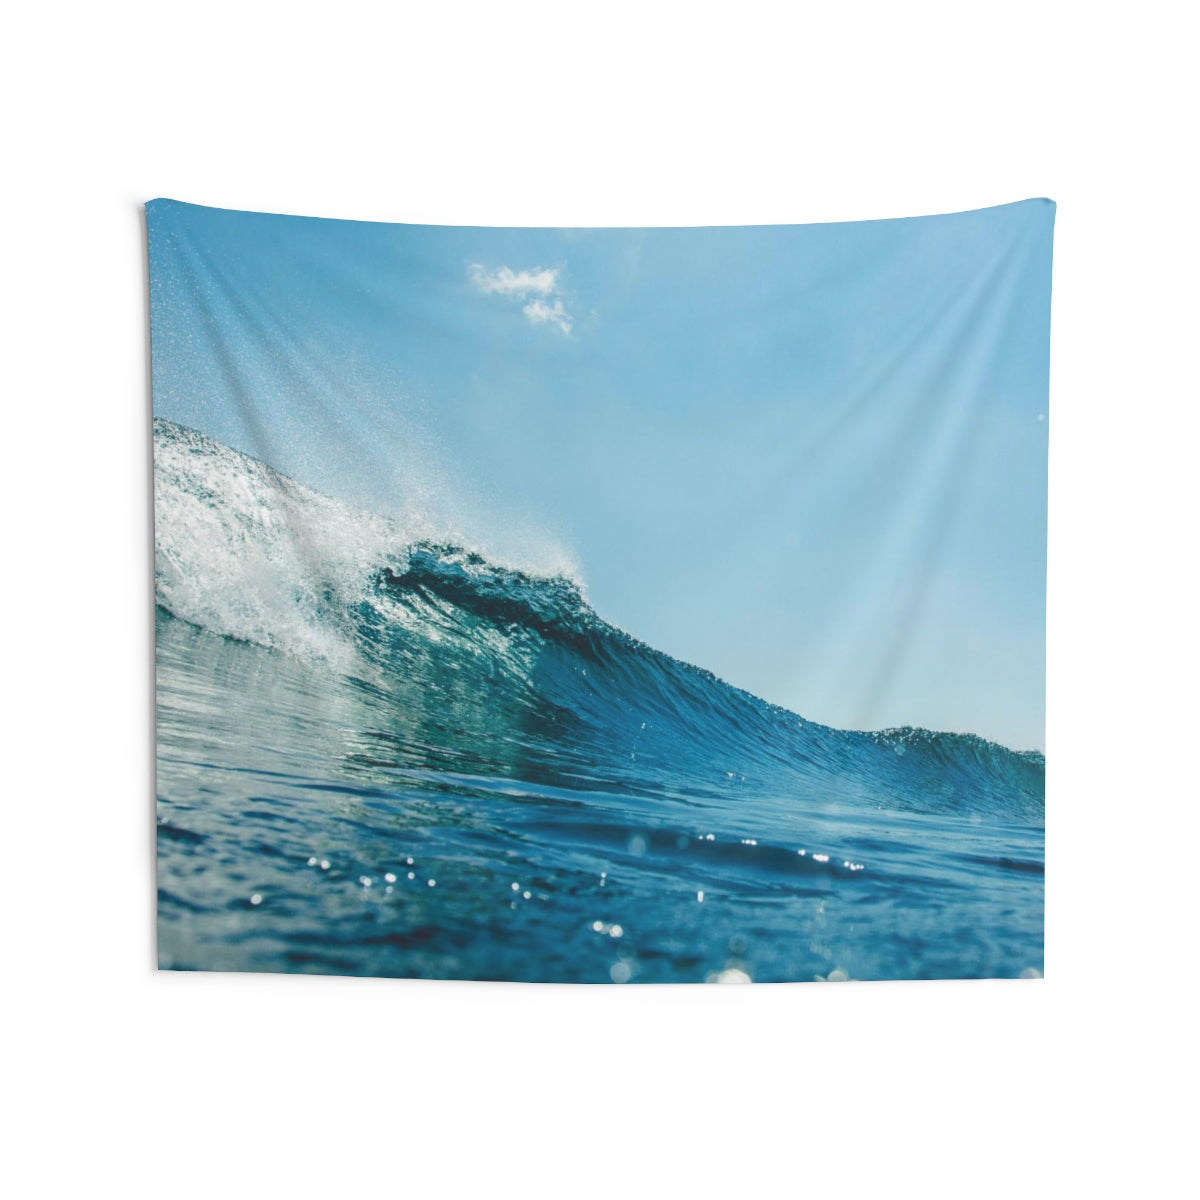 Ocean Sea Wave Tapestry, Blue Sky Surf Spray Landscape Indoor Wall Art Hanging Tapestries Décor Home Dorm Gift Starcove Fashion